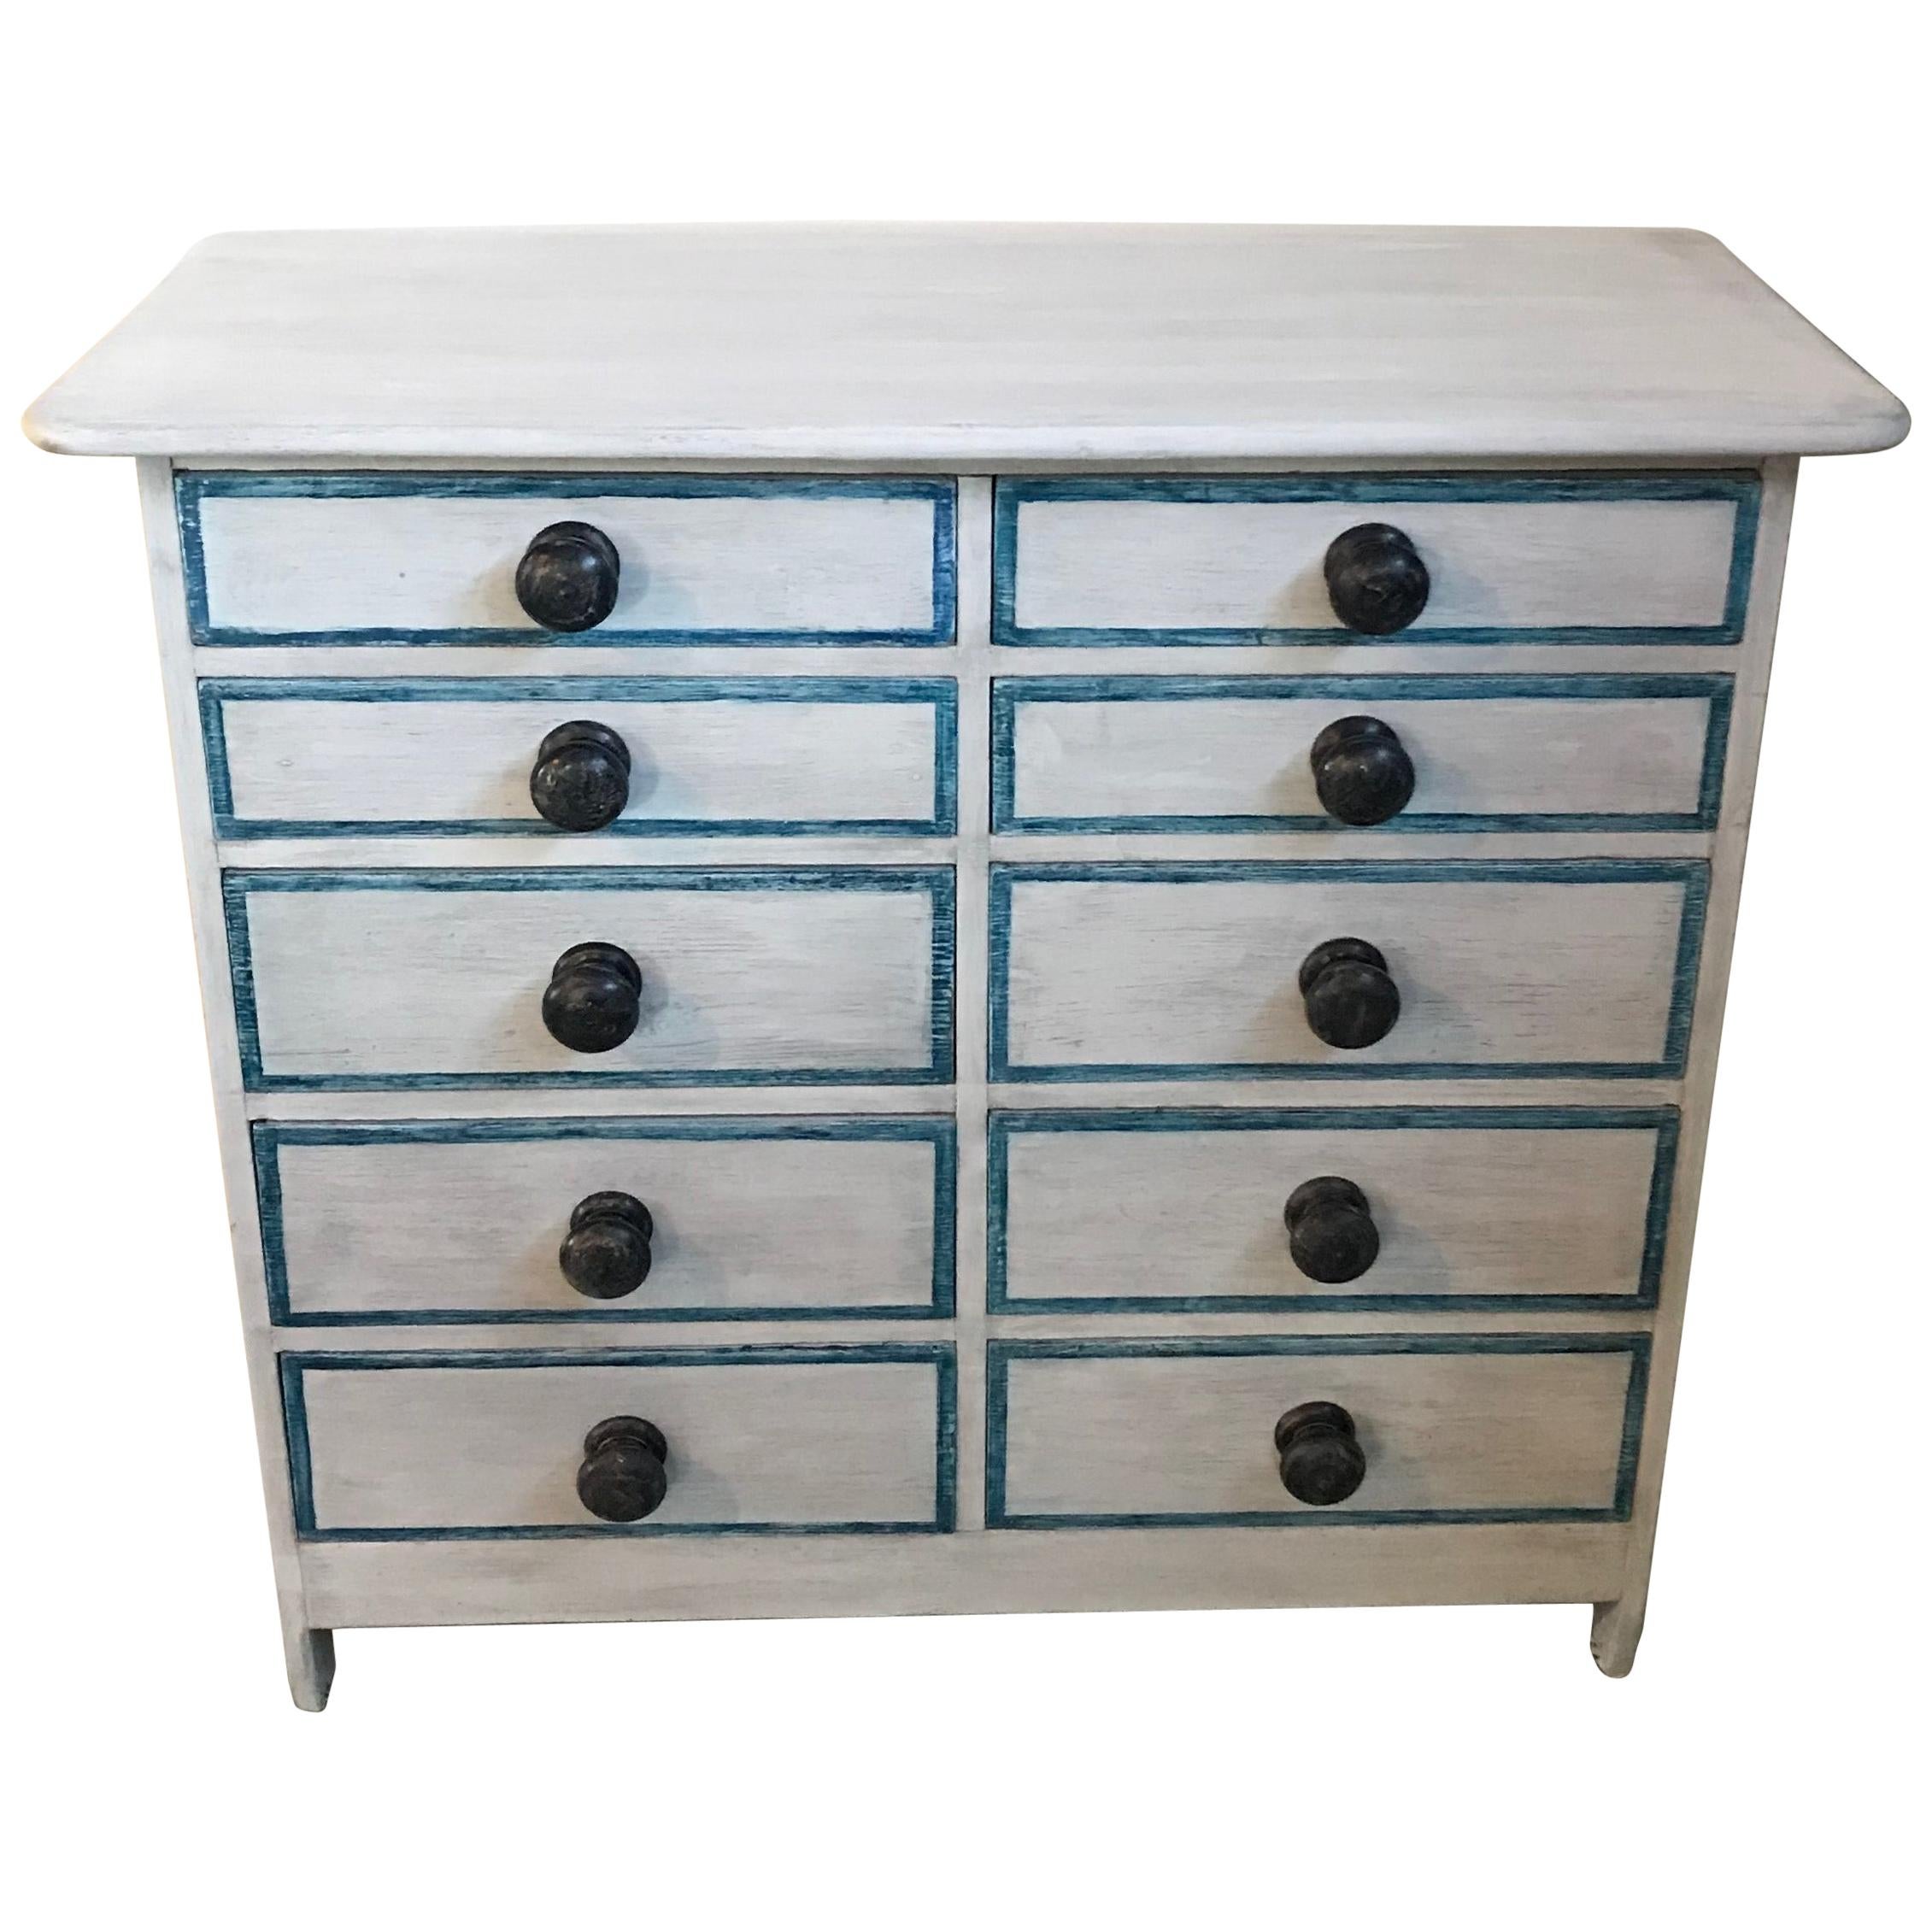 Gustavian Style Painted Chest or Commode with 10 Drawers